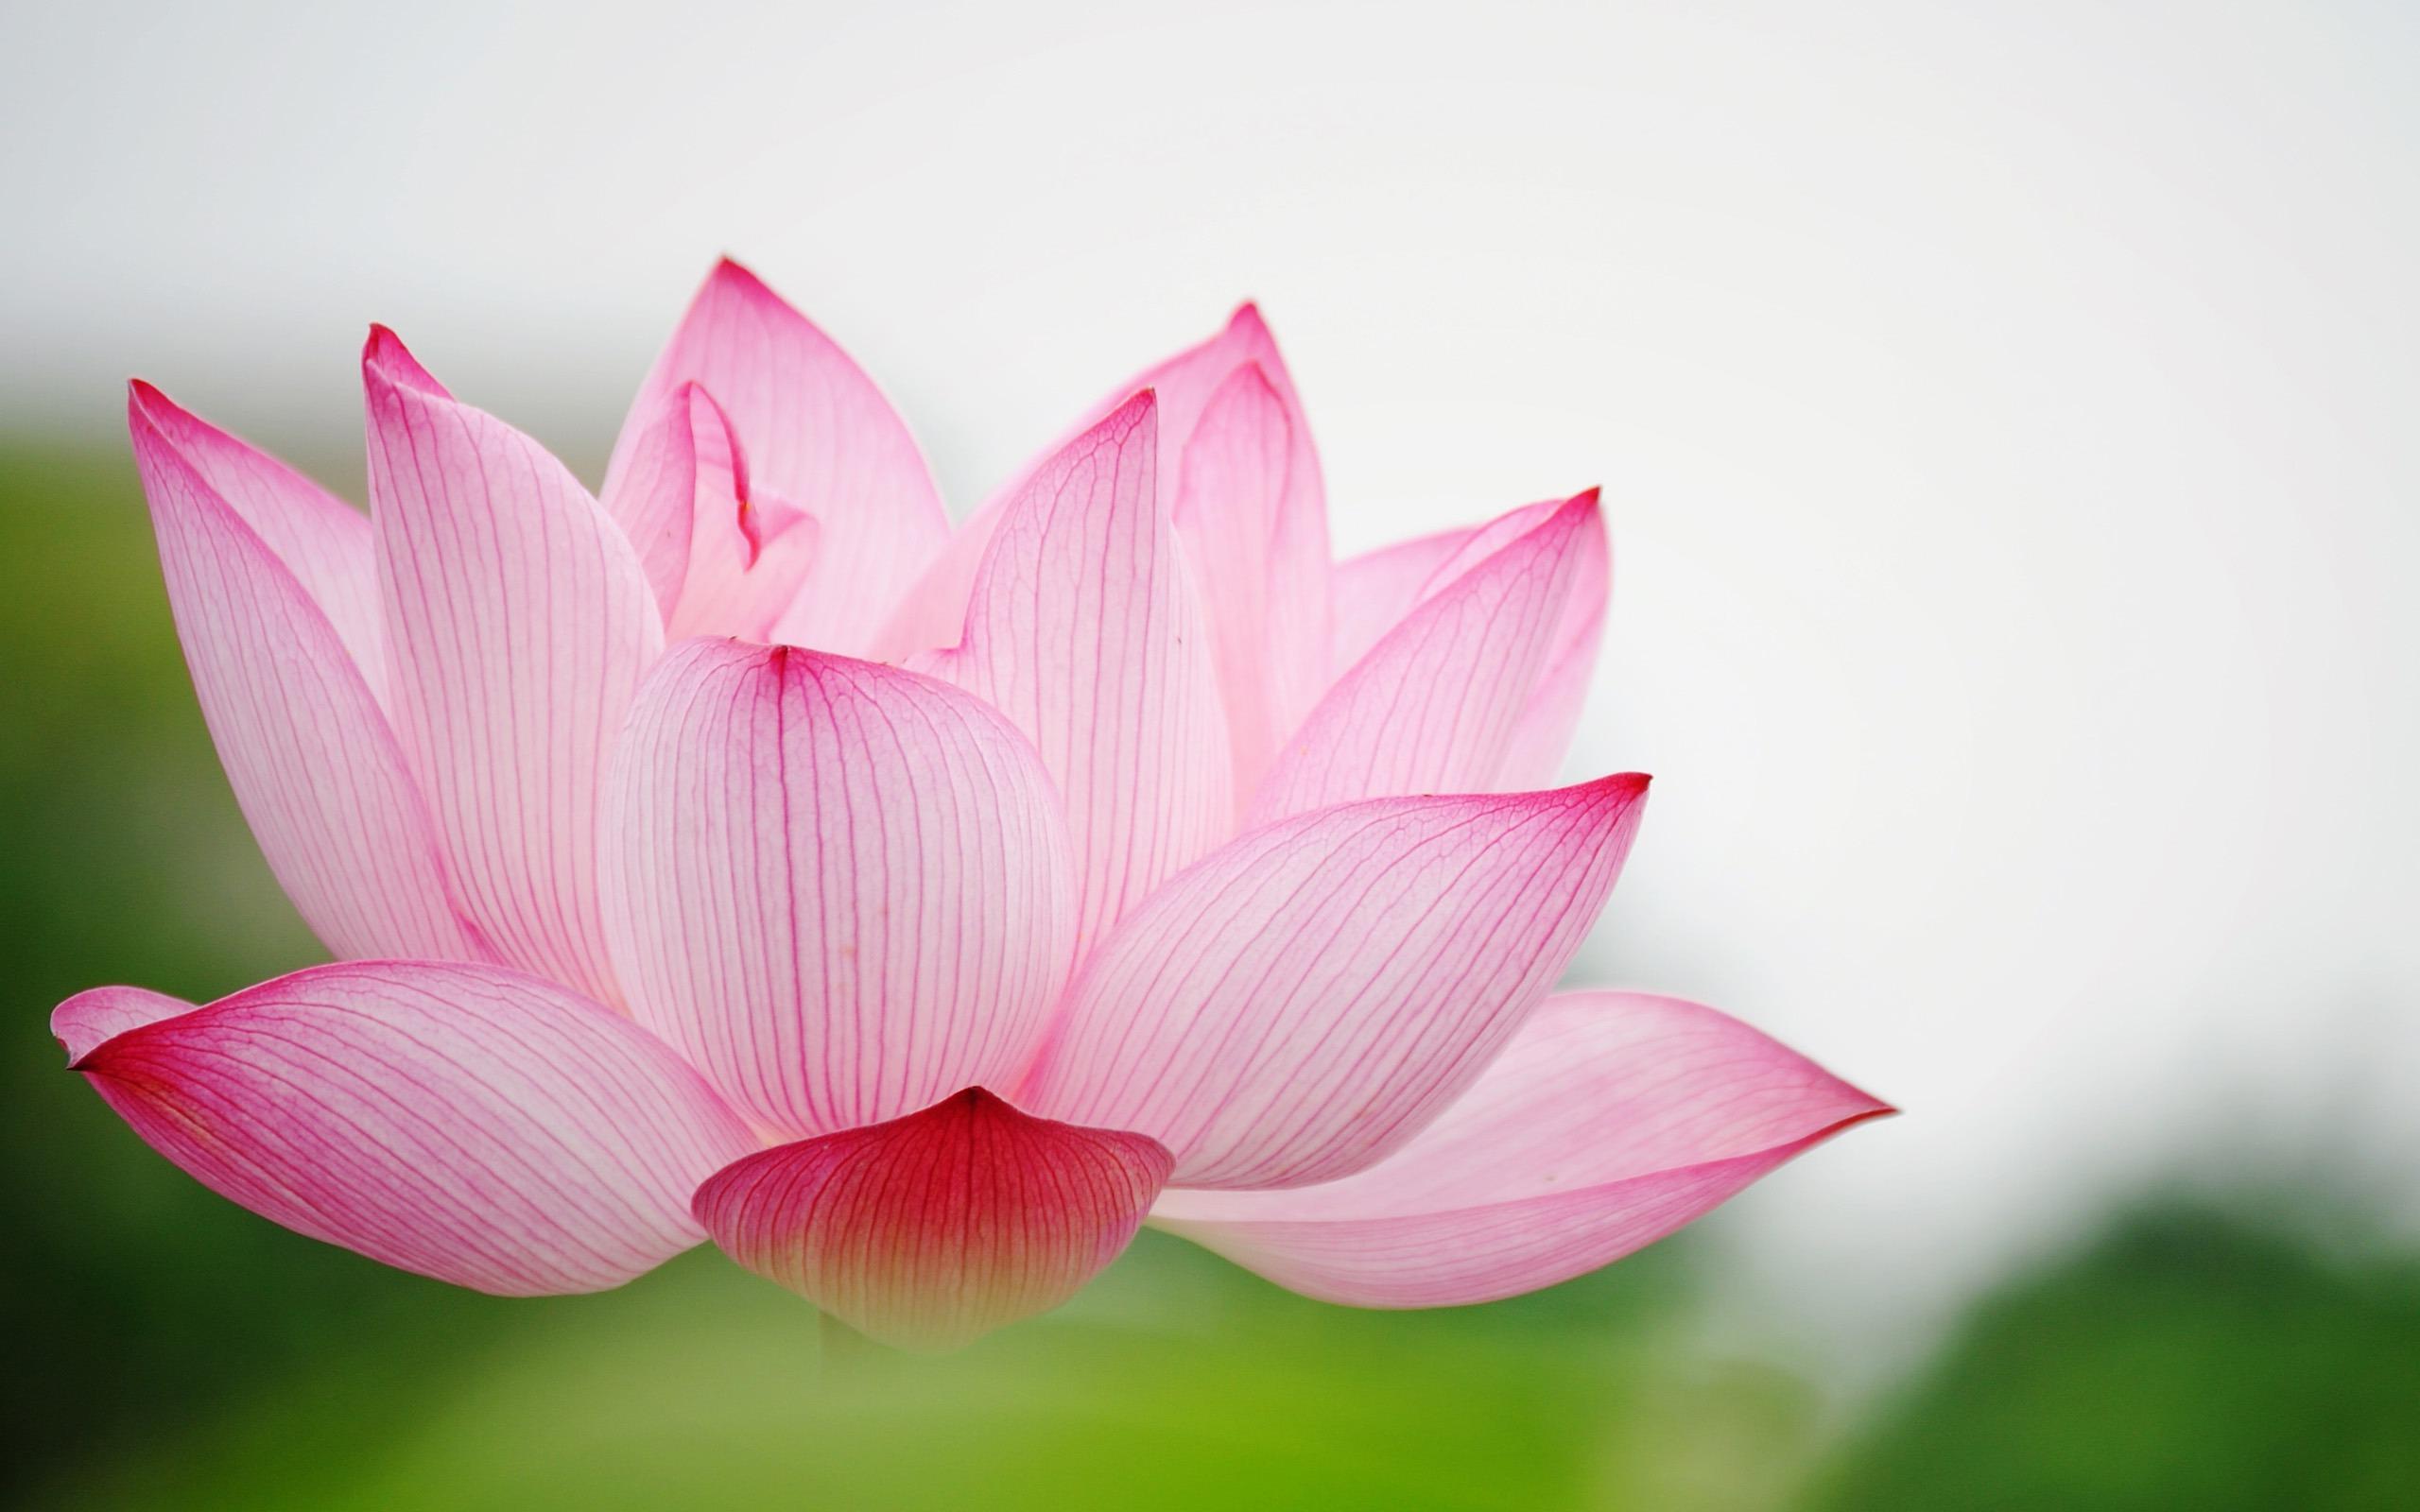 Lotus flower wallpapers hd desktop and mobile backgrounds